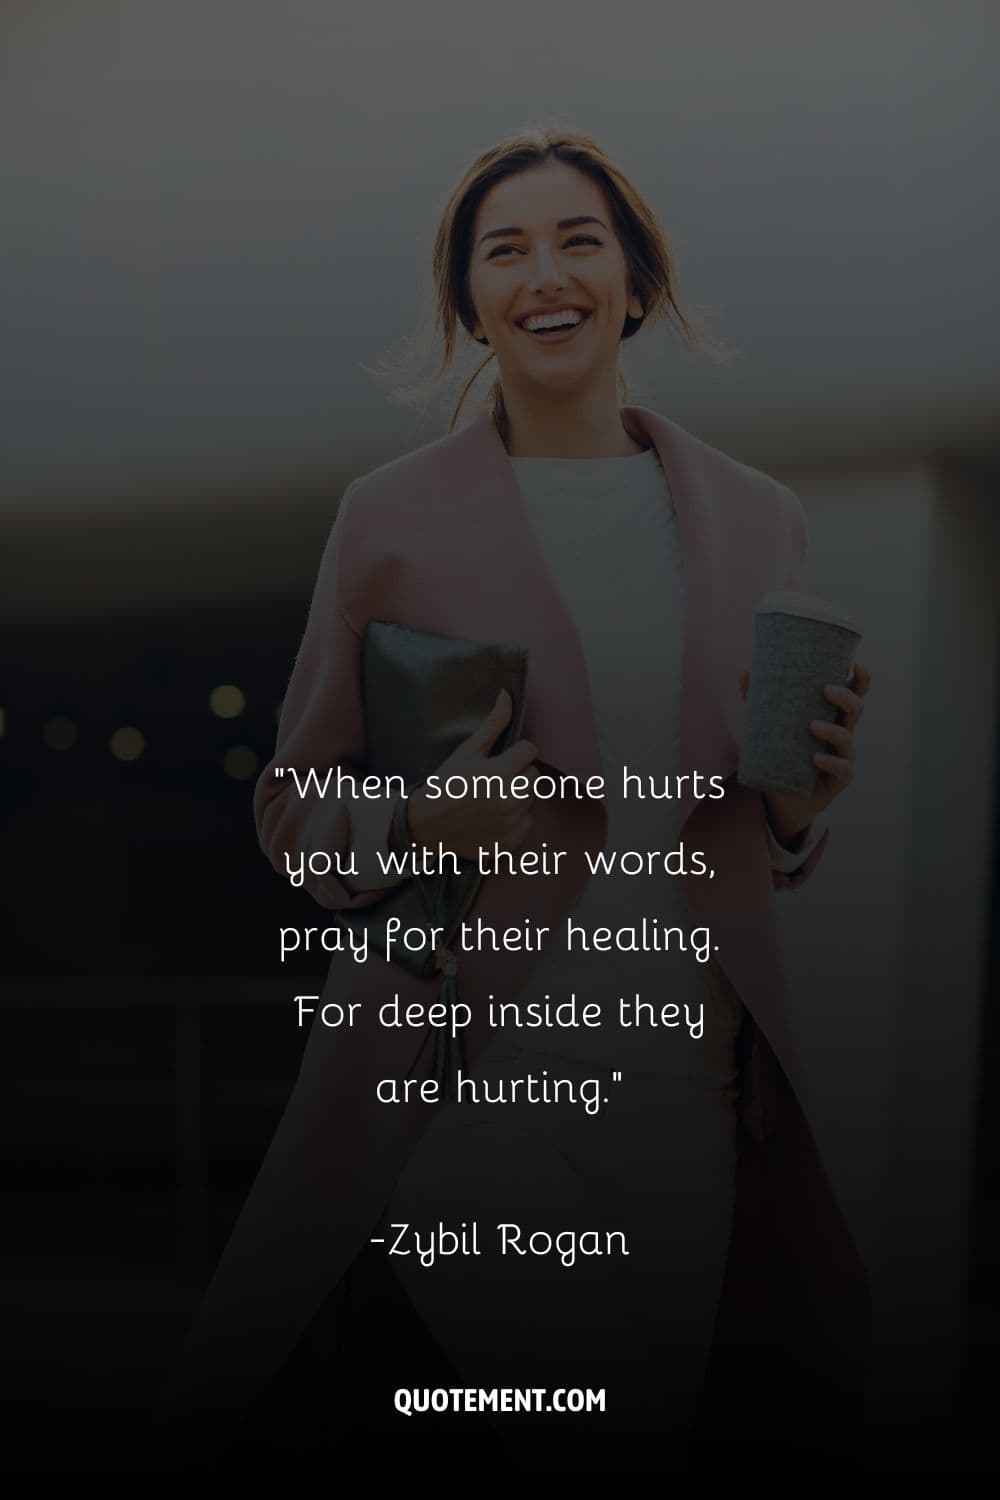 When someone hurts you with their words, pray for their healing. For deep inside they are hurting